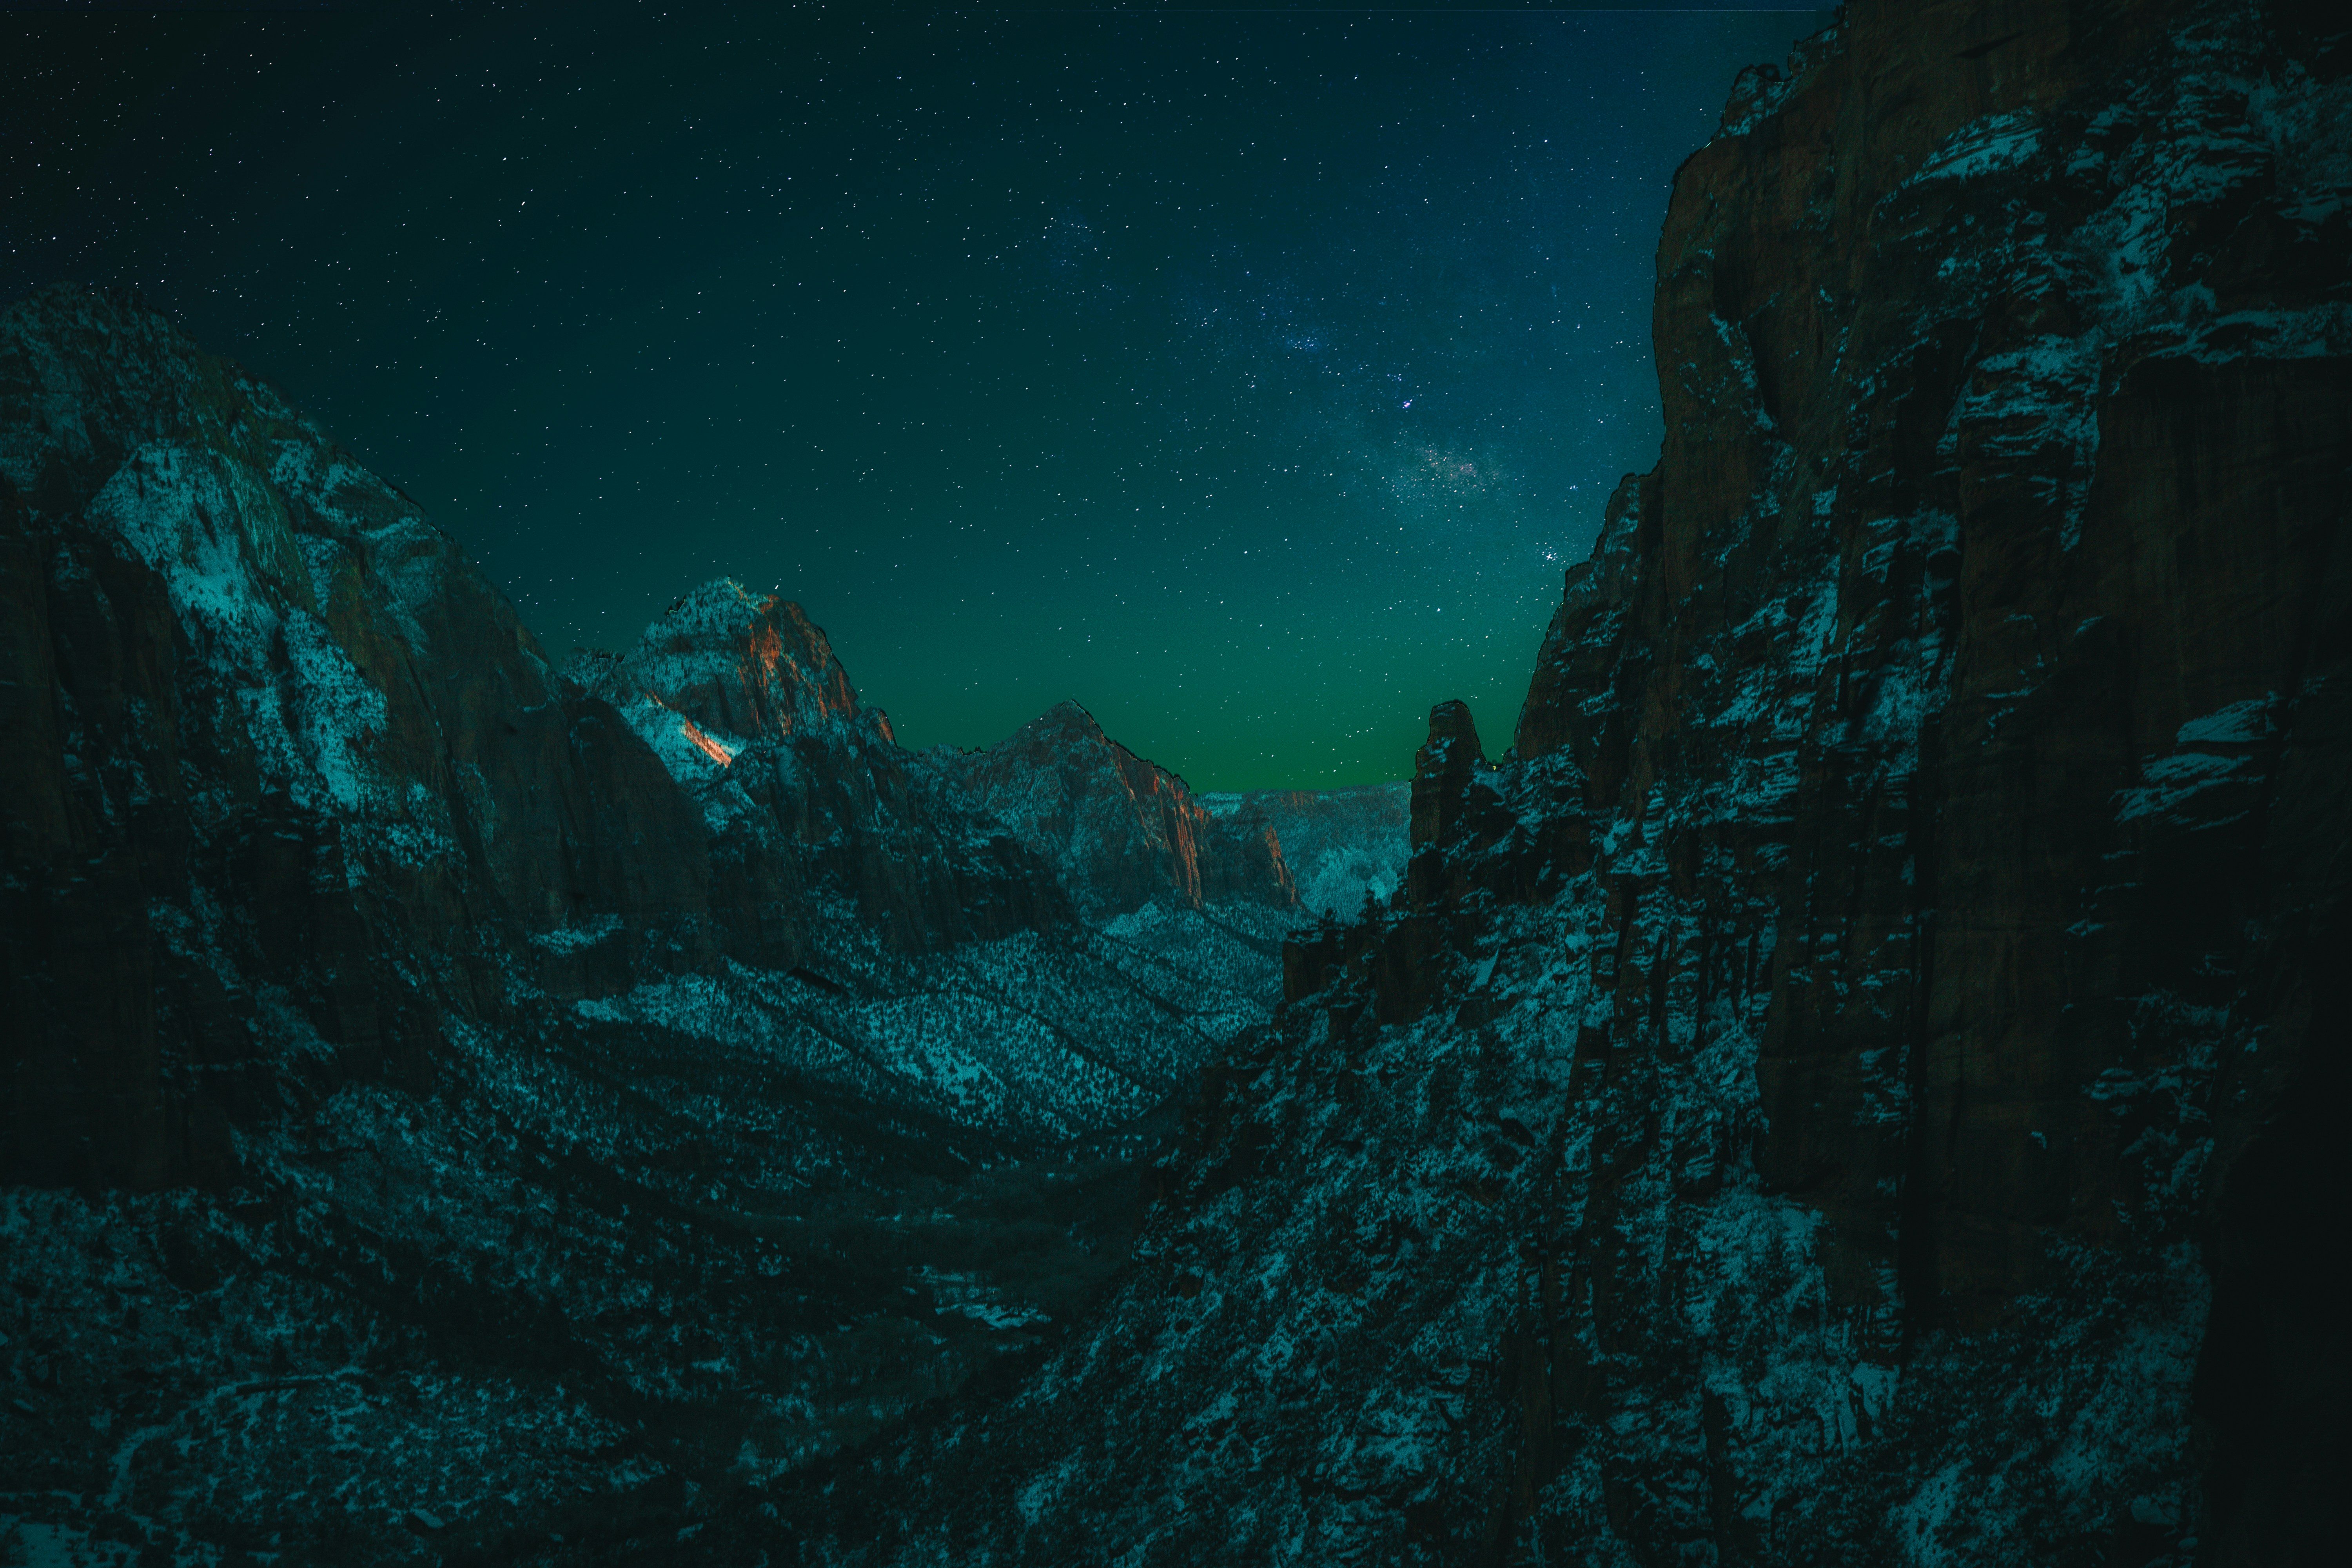 A Starry Night in Zion